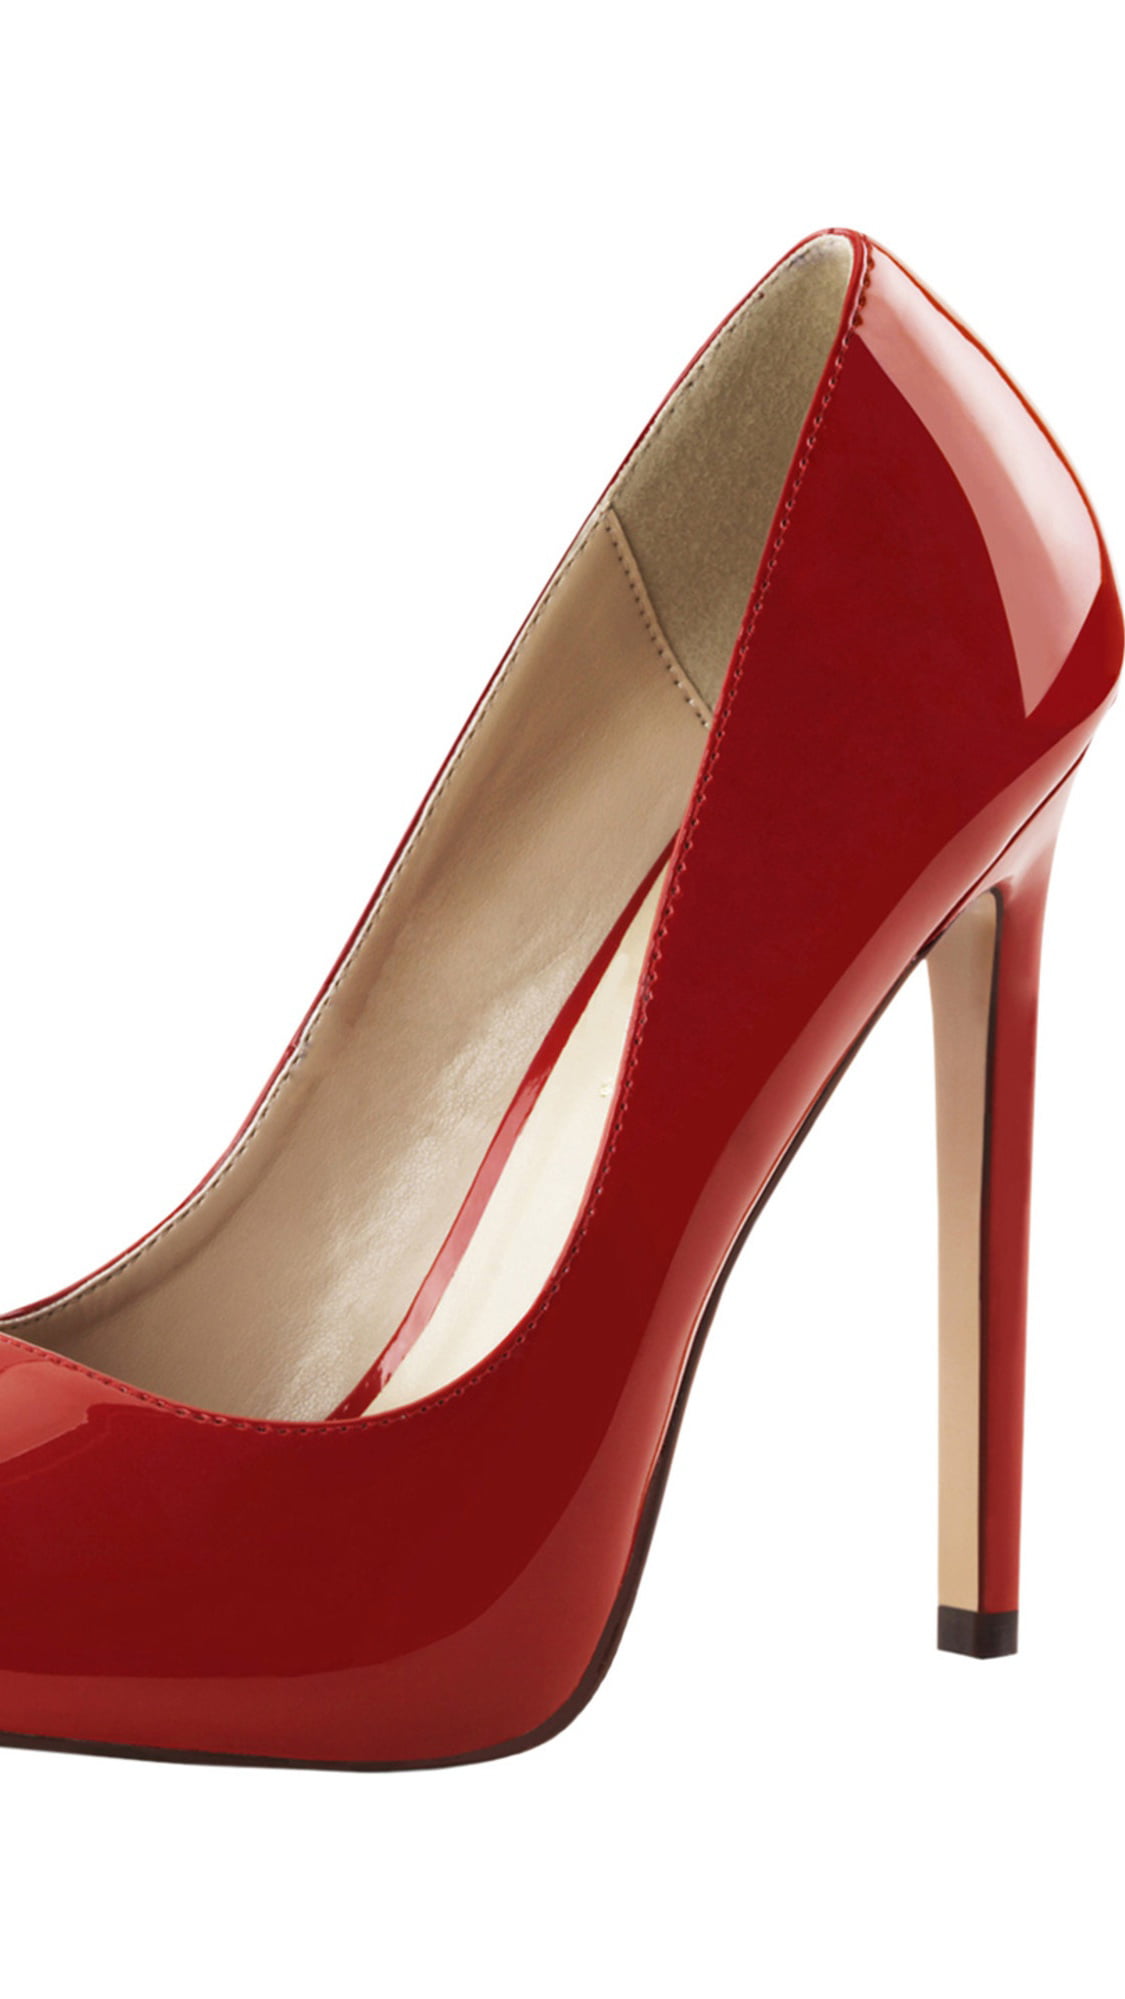 red closed toe pumps